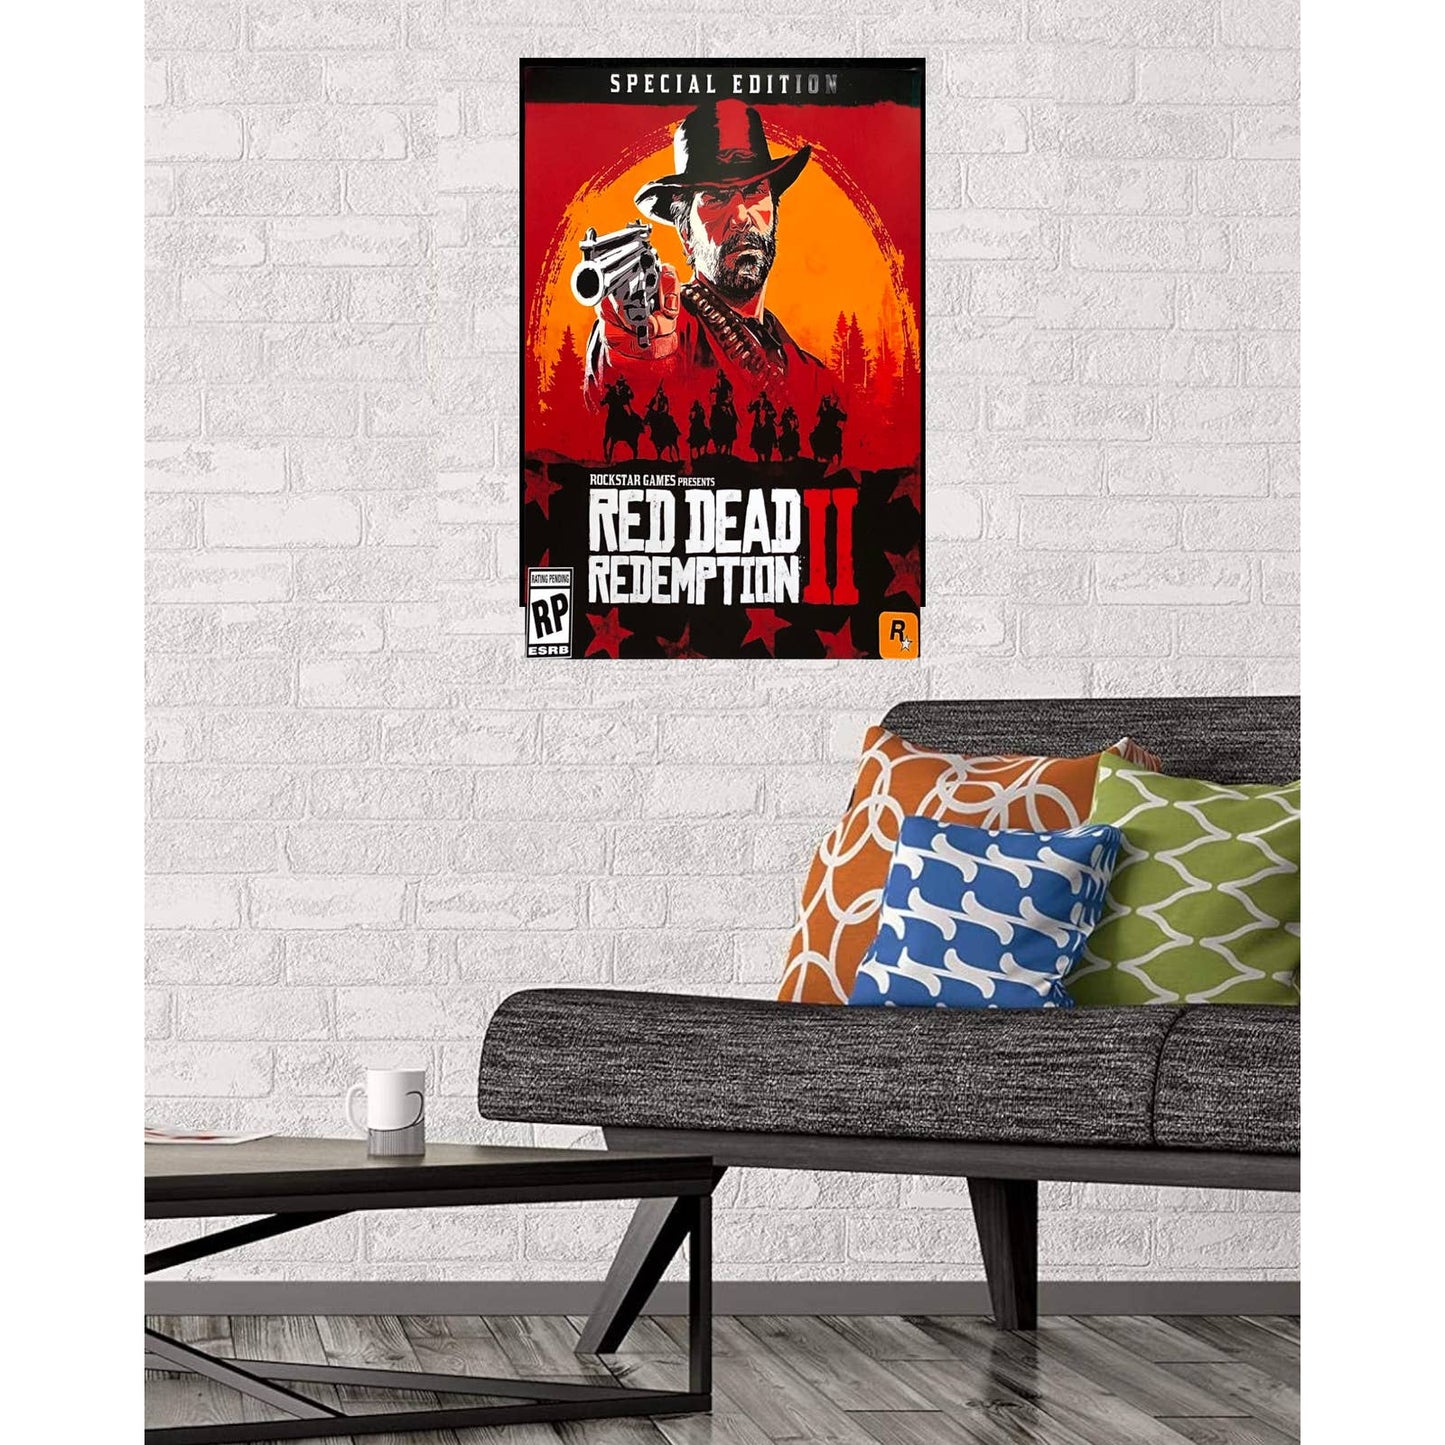 Red Dead Redemption II Video Game Poster Print Wall Art 16"x24"